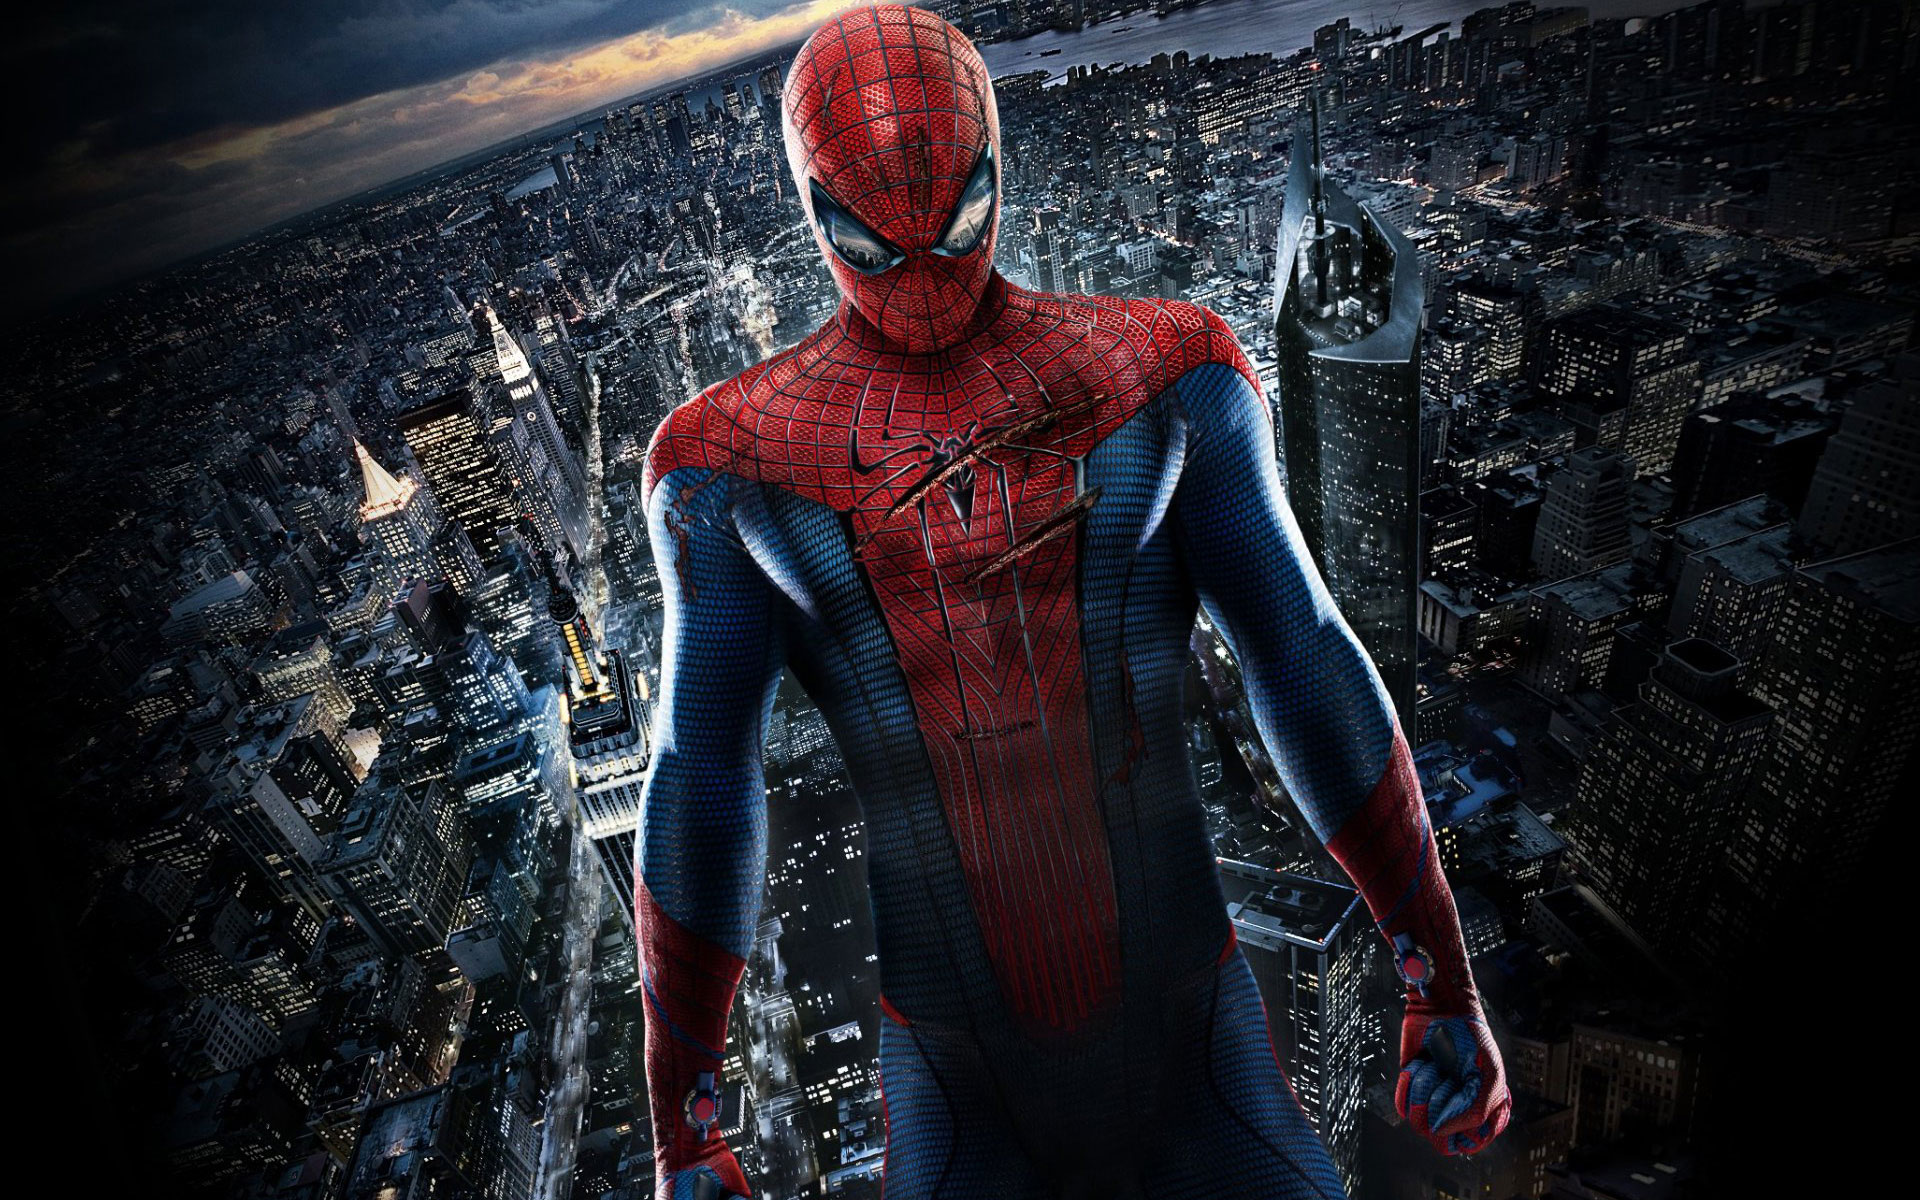 spiderman-is-this-the-first-marvel-movie-spider-man-will-star-in